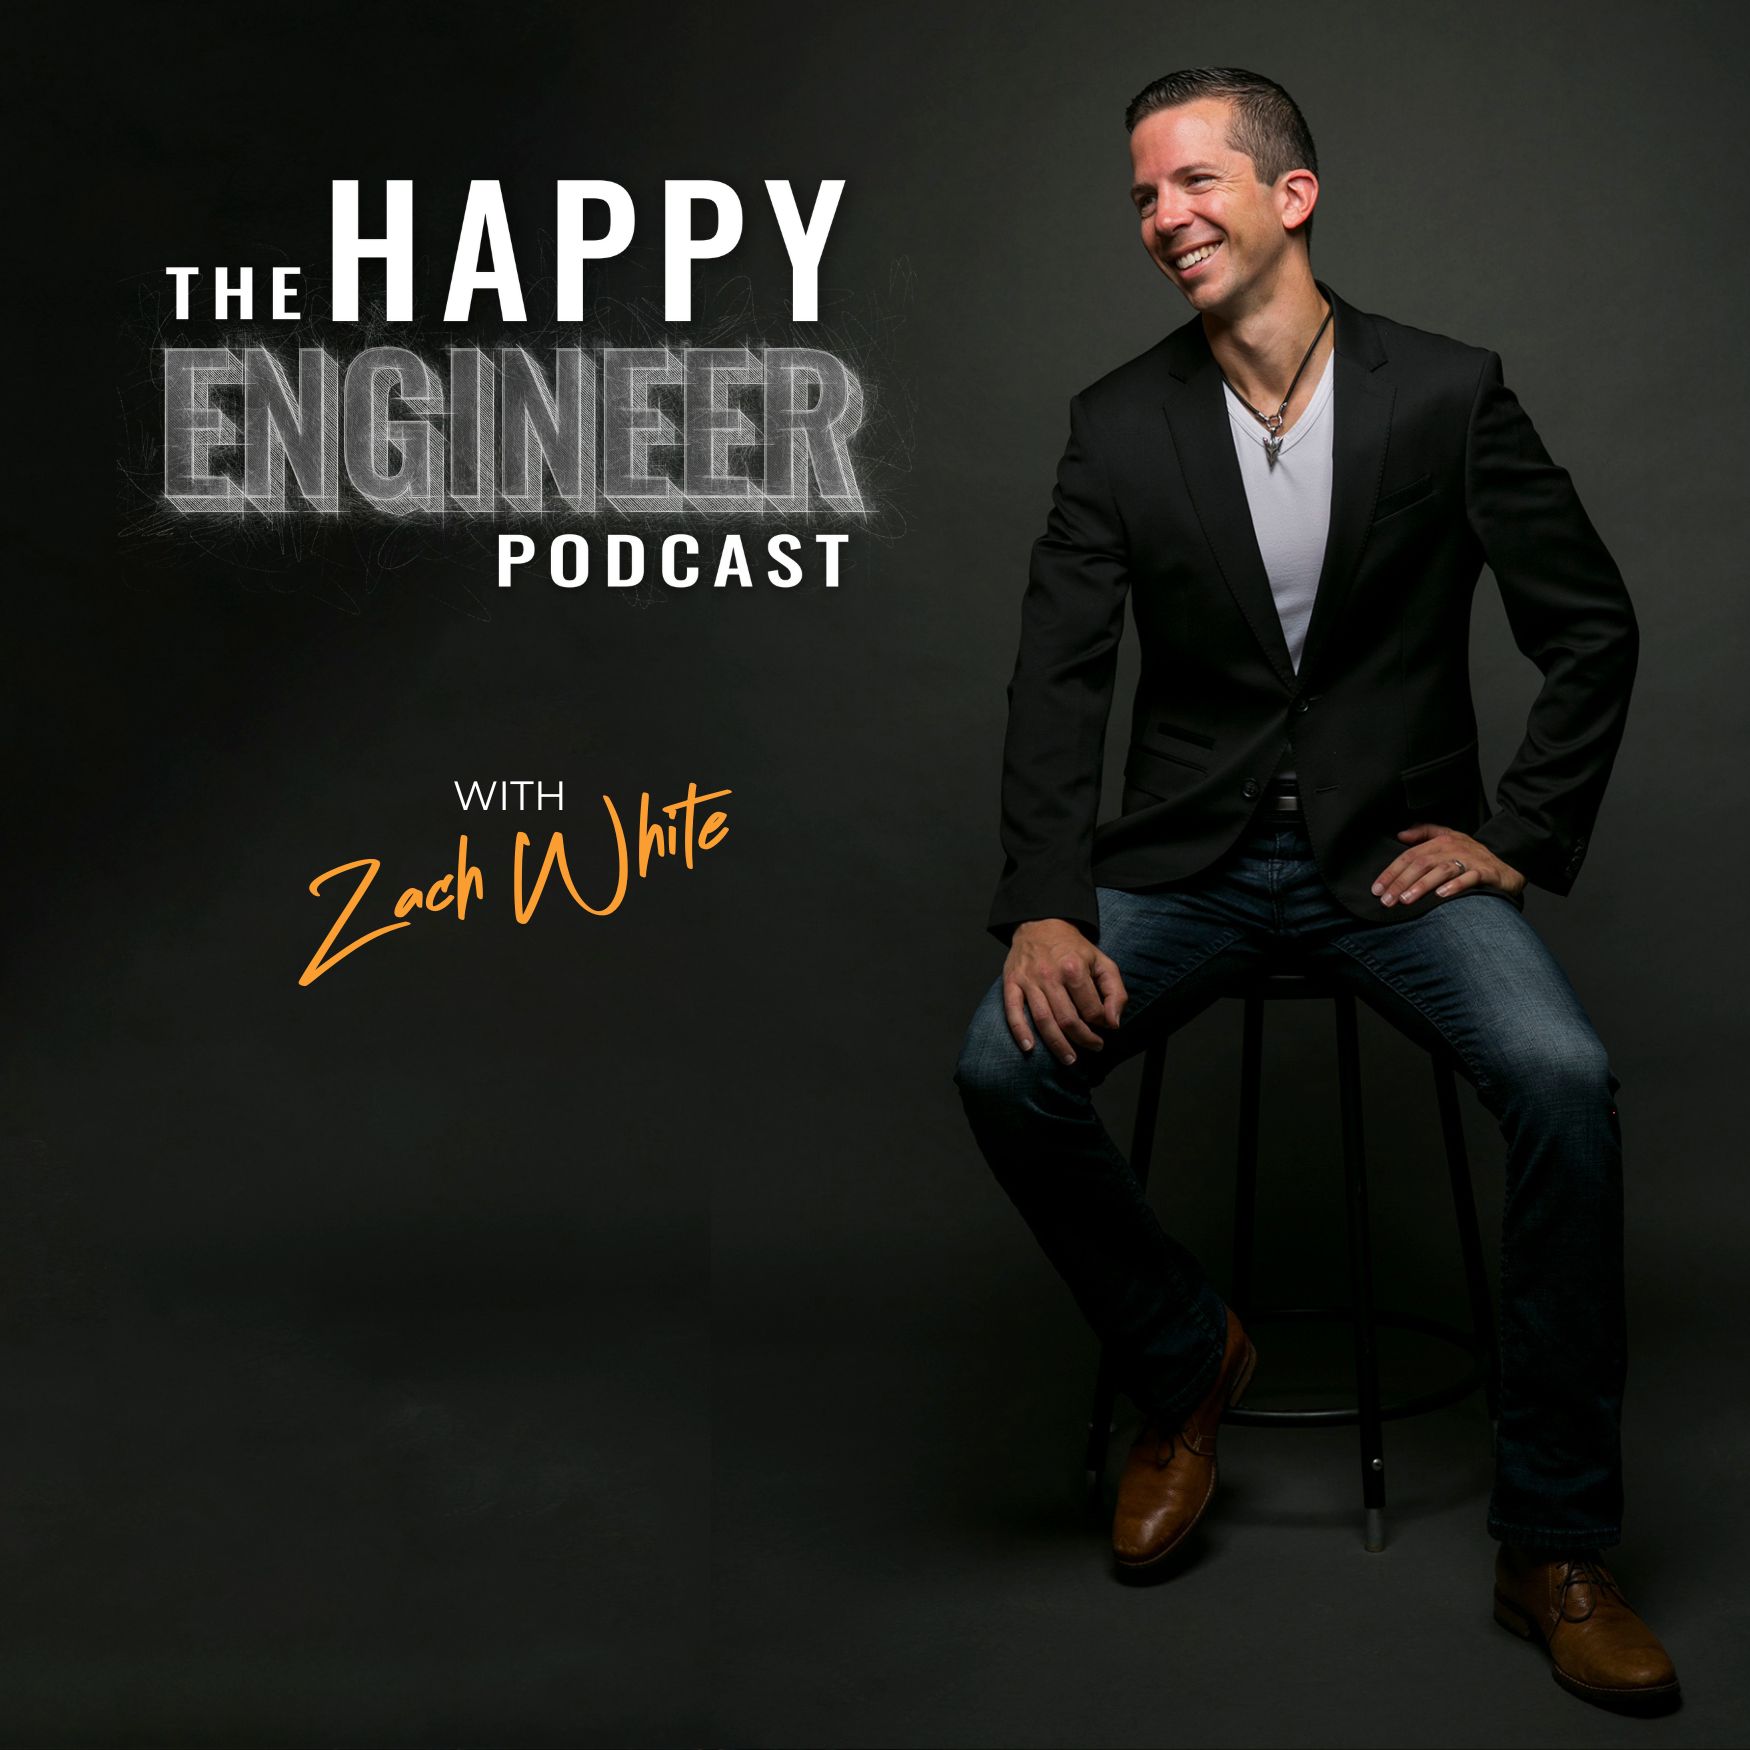 129: How to Increase Confidence Interviewing and Get the Job You Want